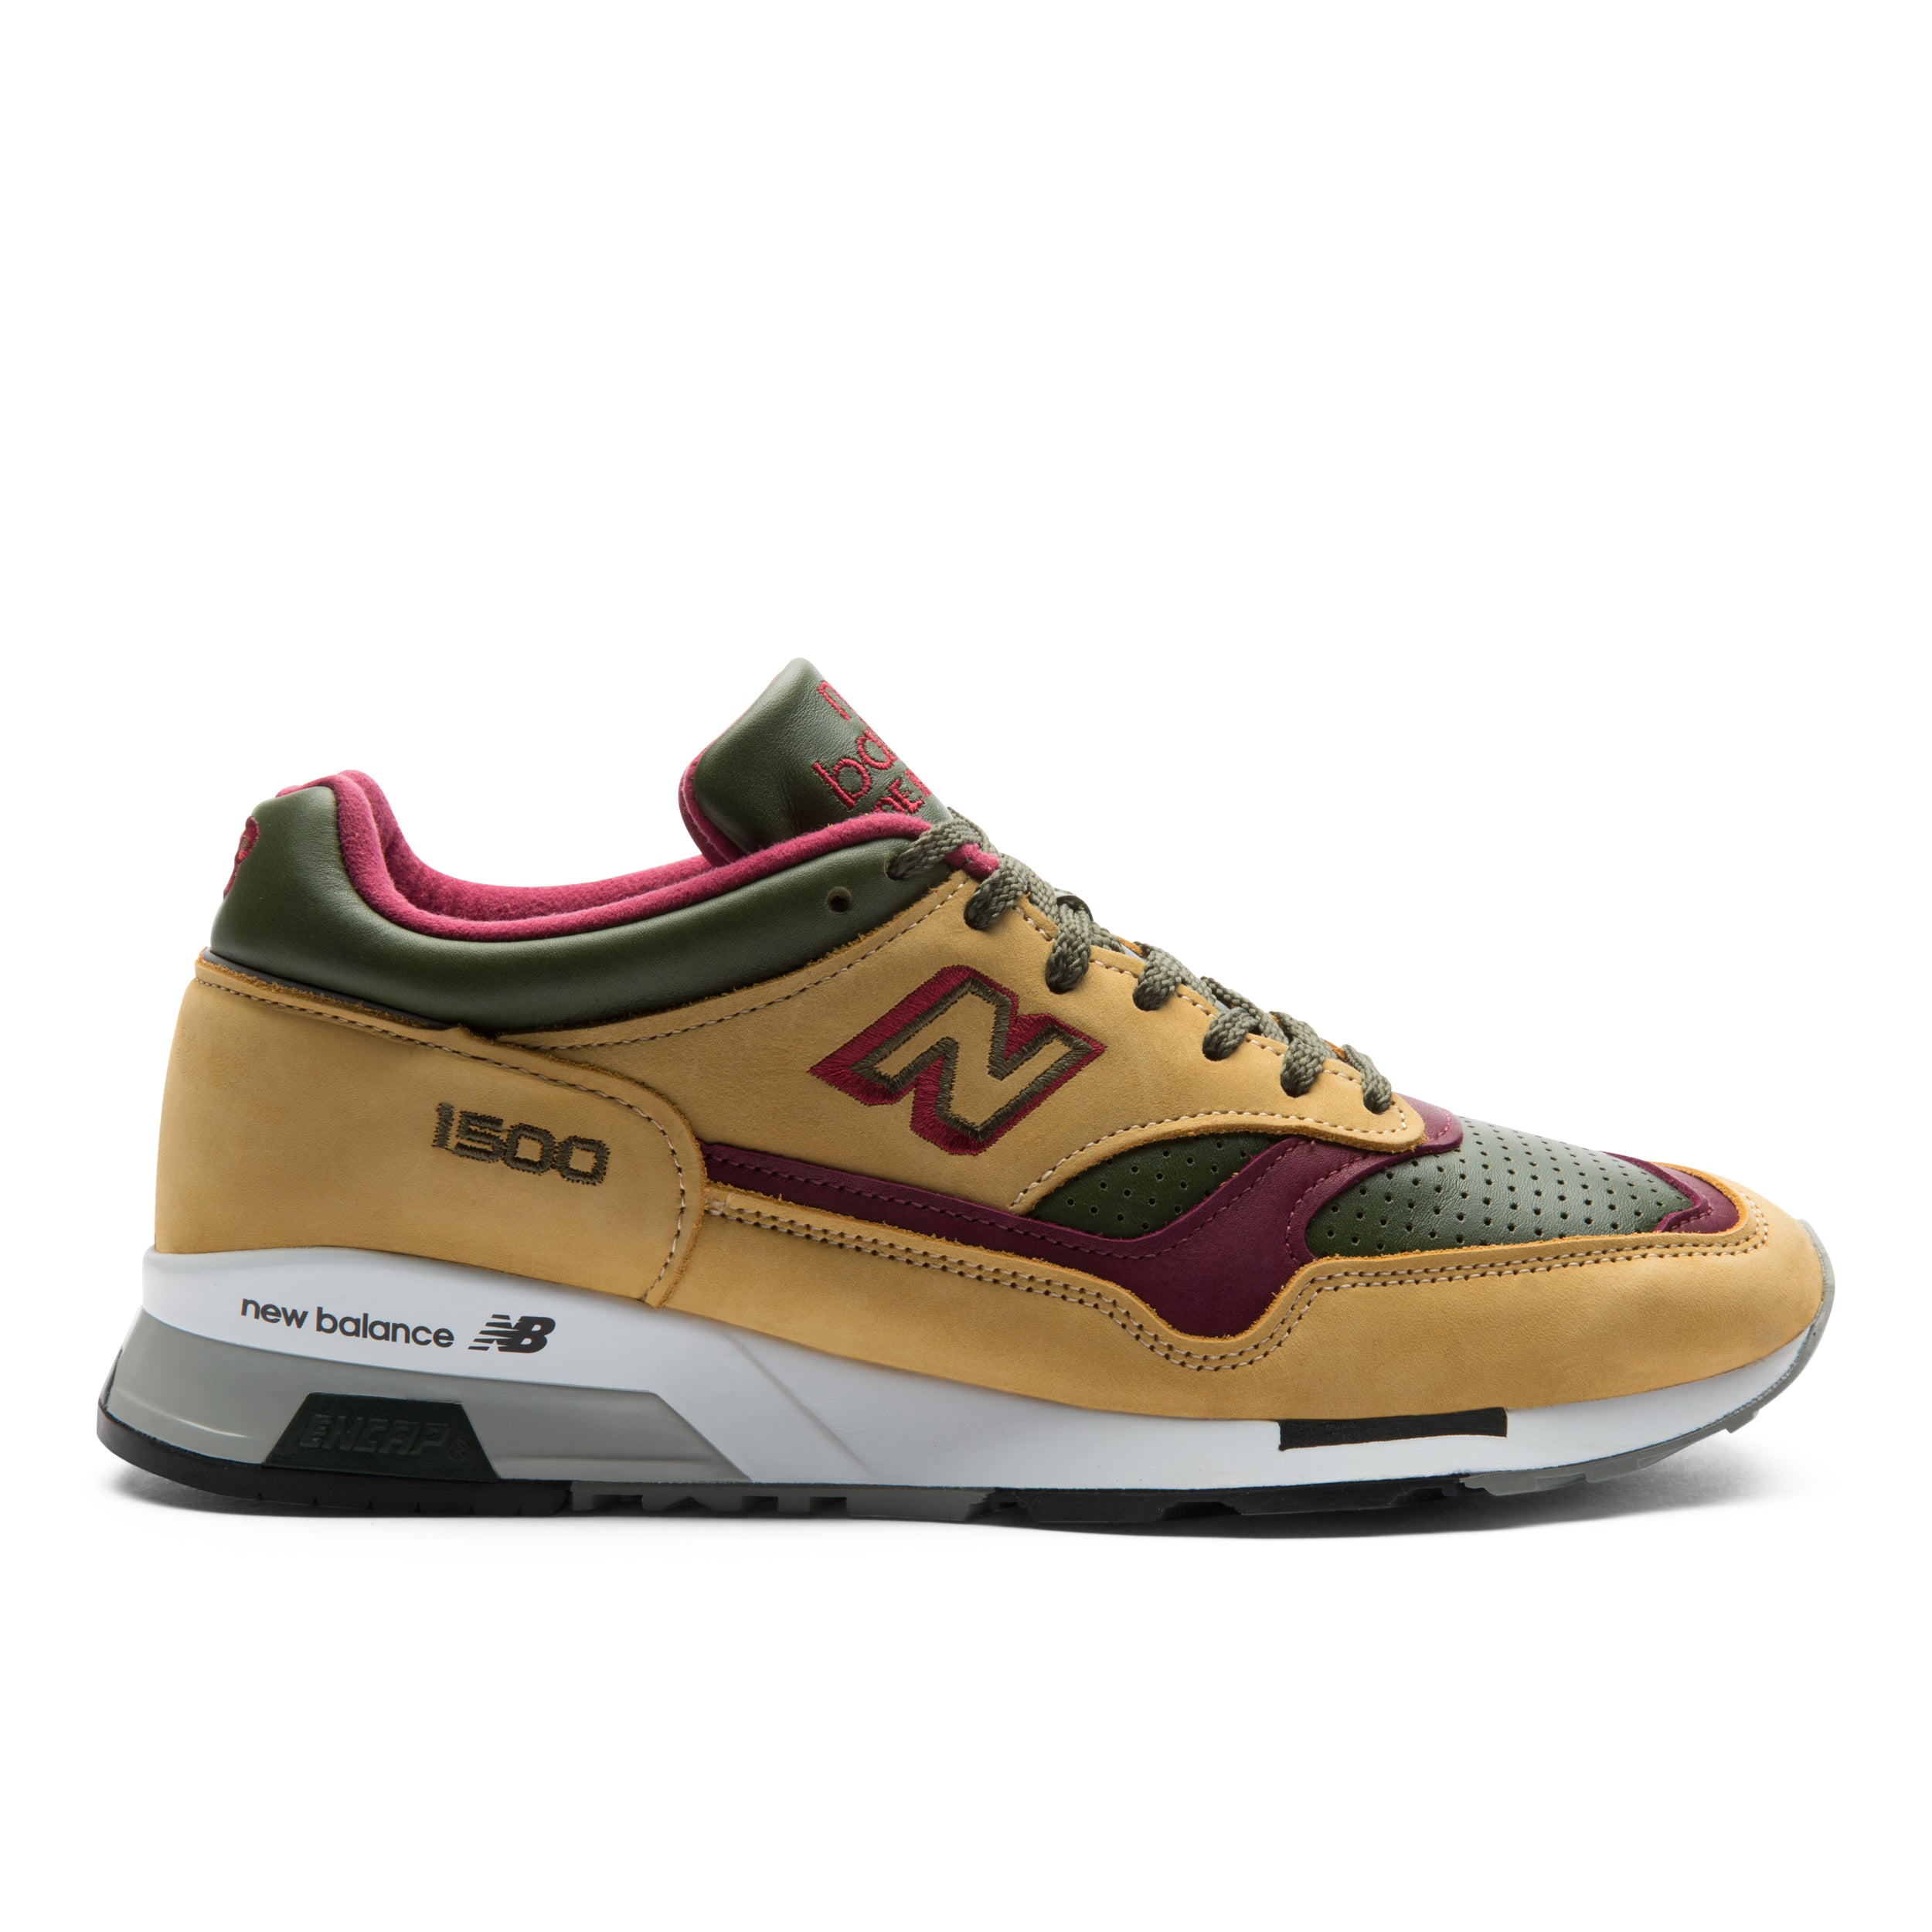 new balance red and yellow